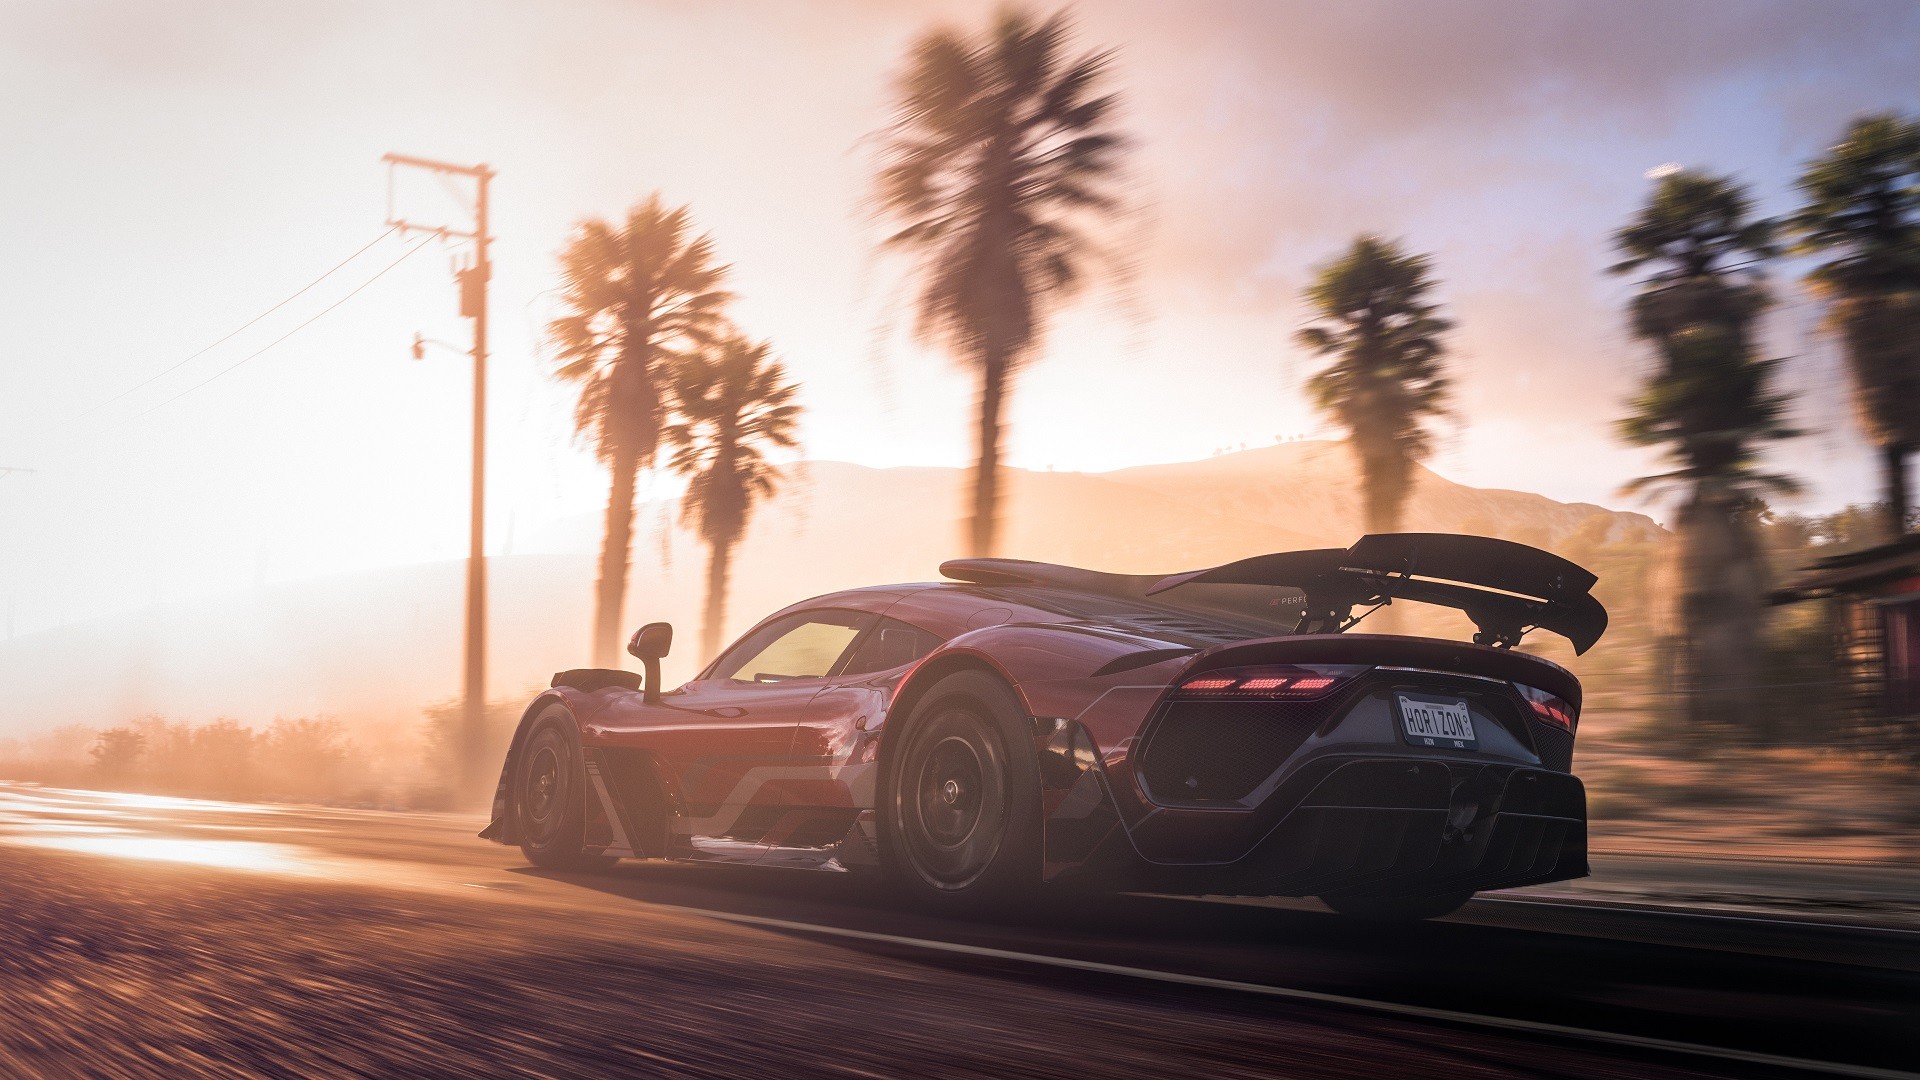 Forza Horizon 5 Coming in November With Mexico Setting